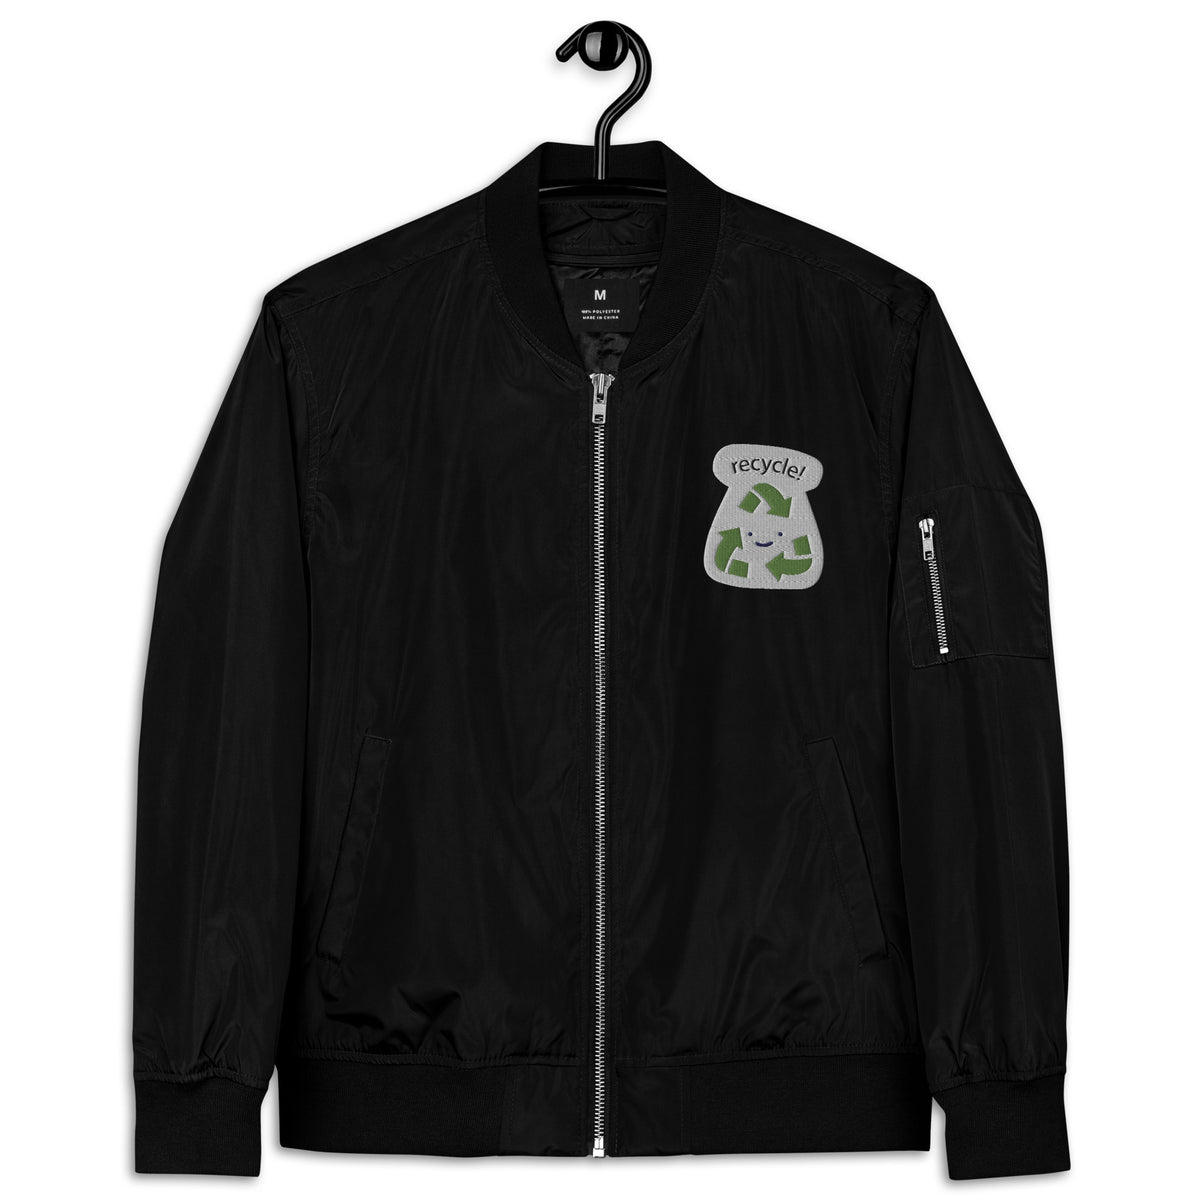 Recycle Premium Recycled Bomber Jacket